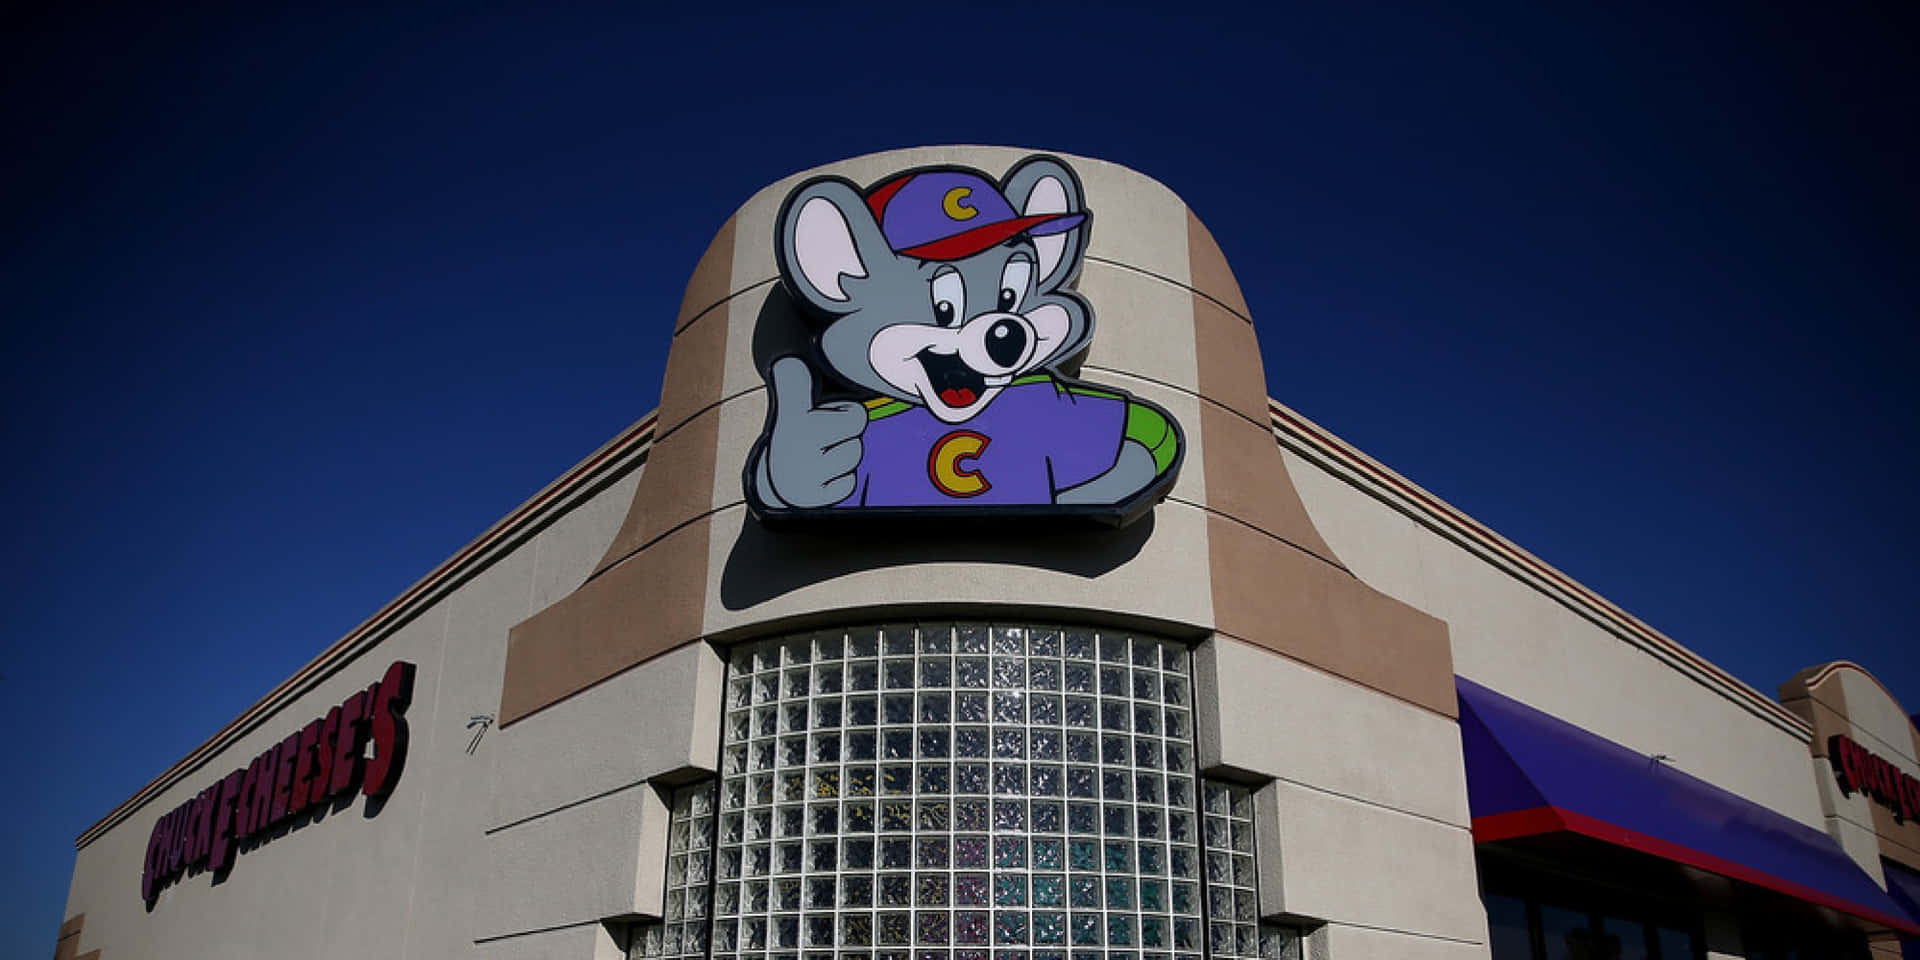 Gather 'round for a fun-filled night of games, pizza and prizes at Chuck E Cheese!